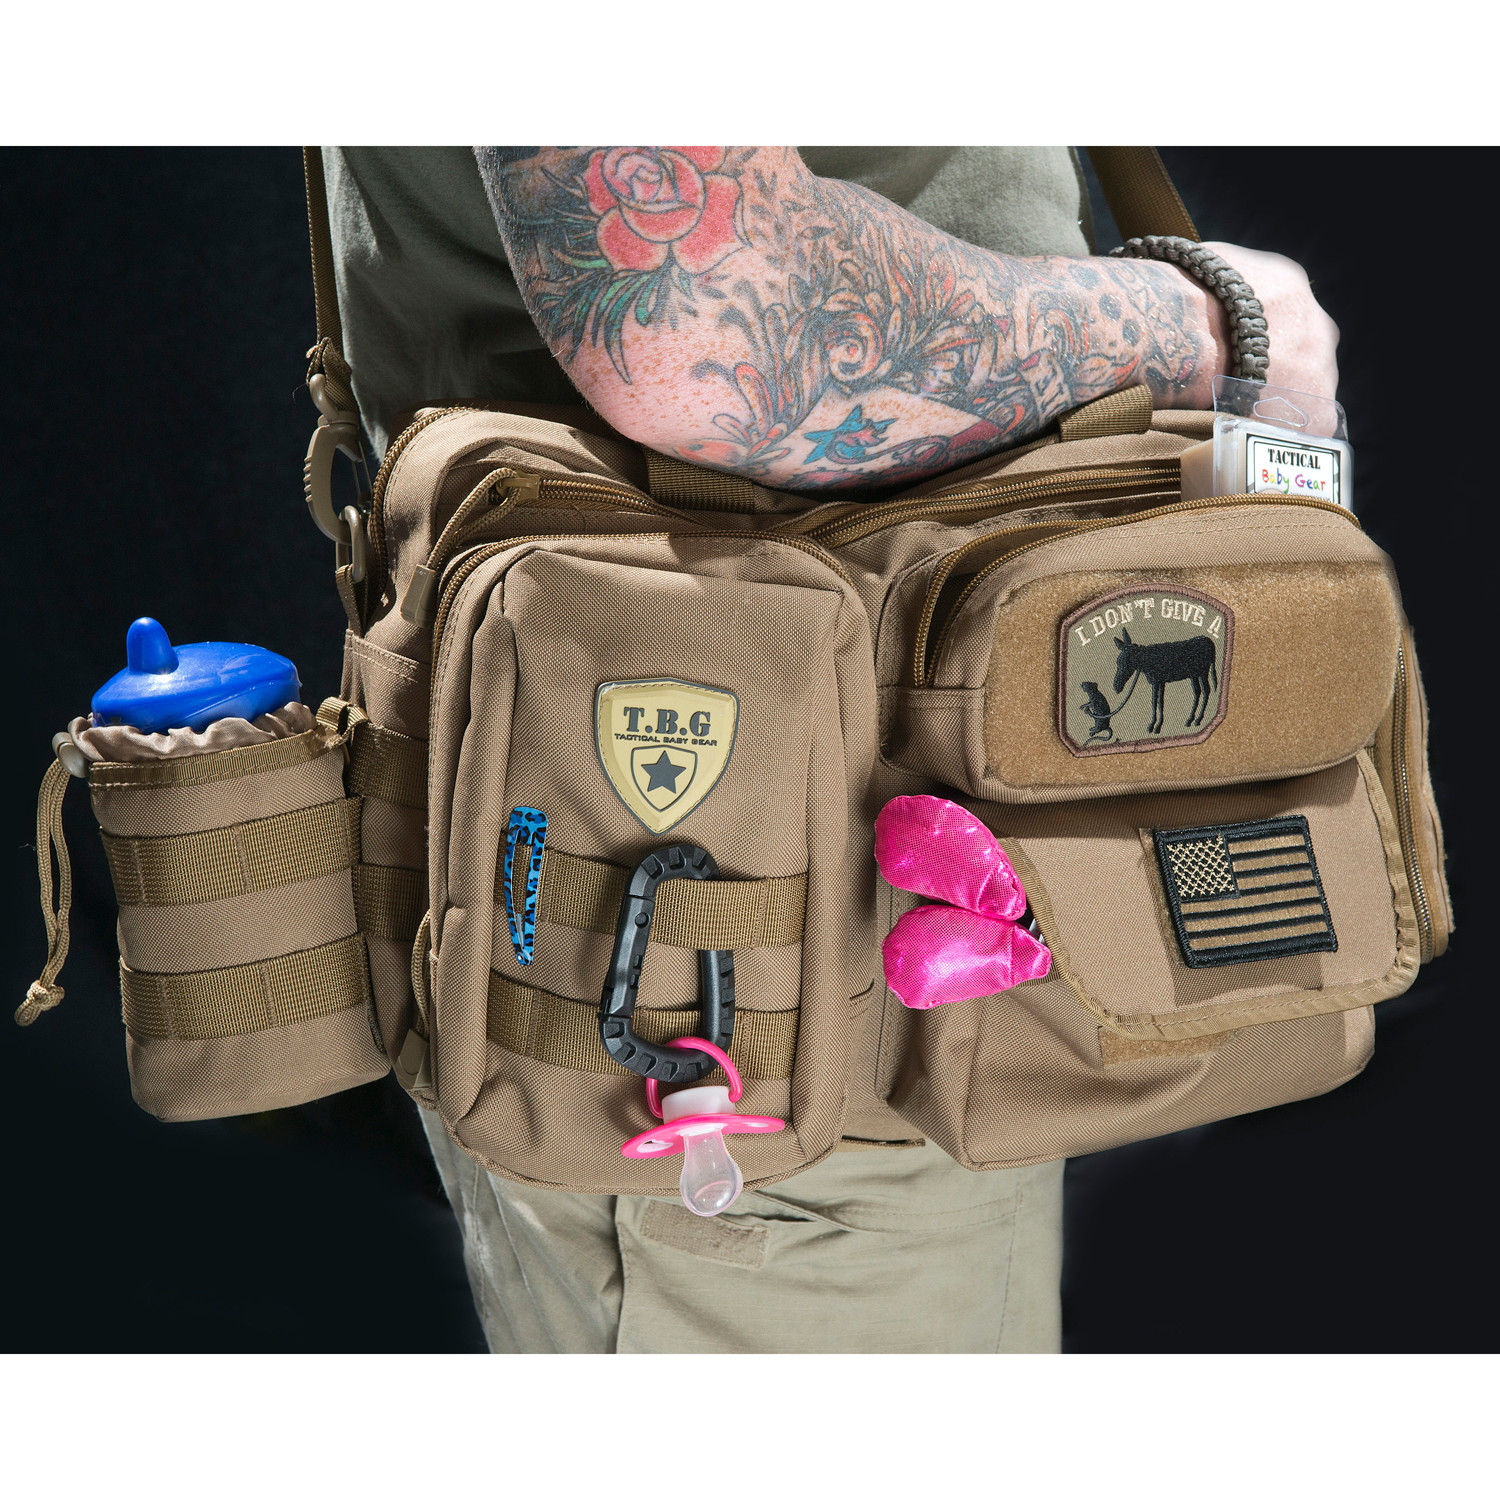 Diaper Bag Market - Size, Share, Trends, and Forecast to 2024